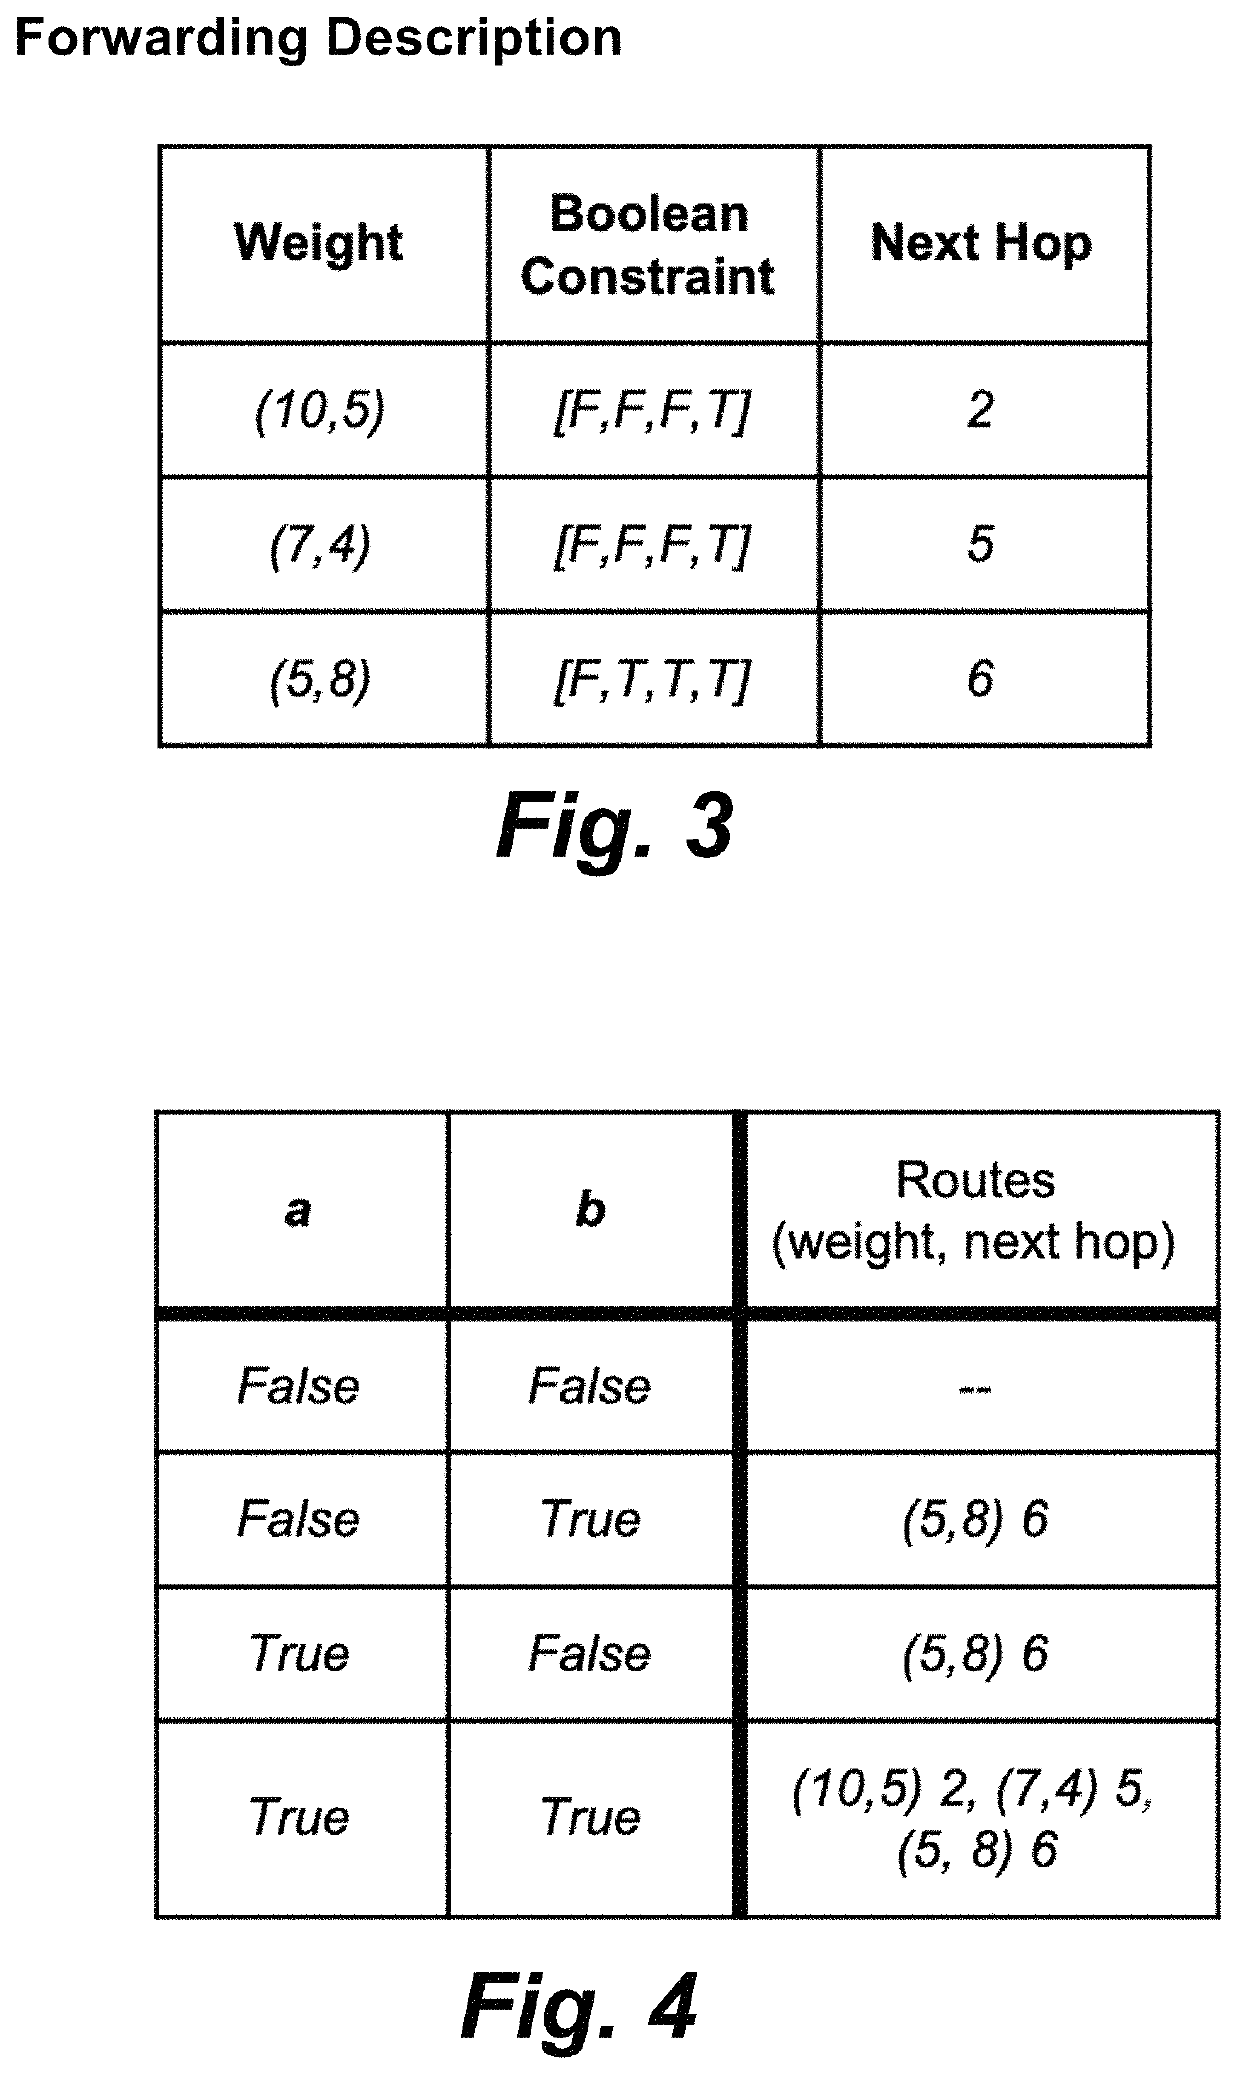 Network congestion reduction using boolean constrained multipath routing